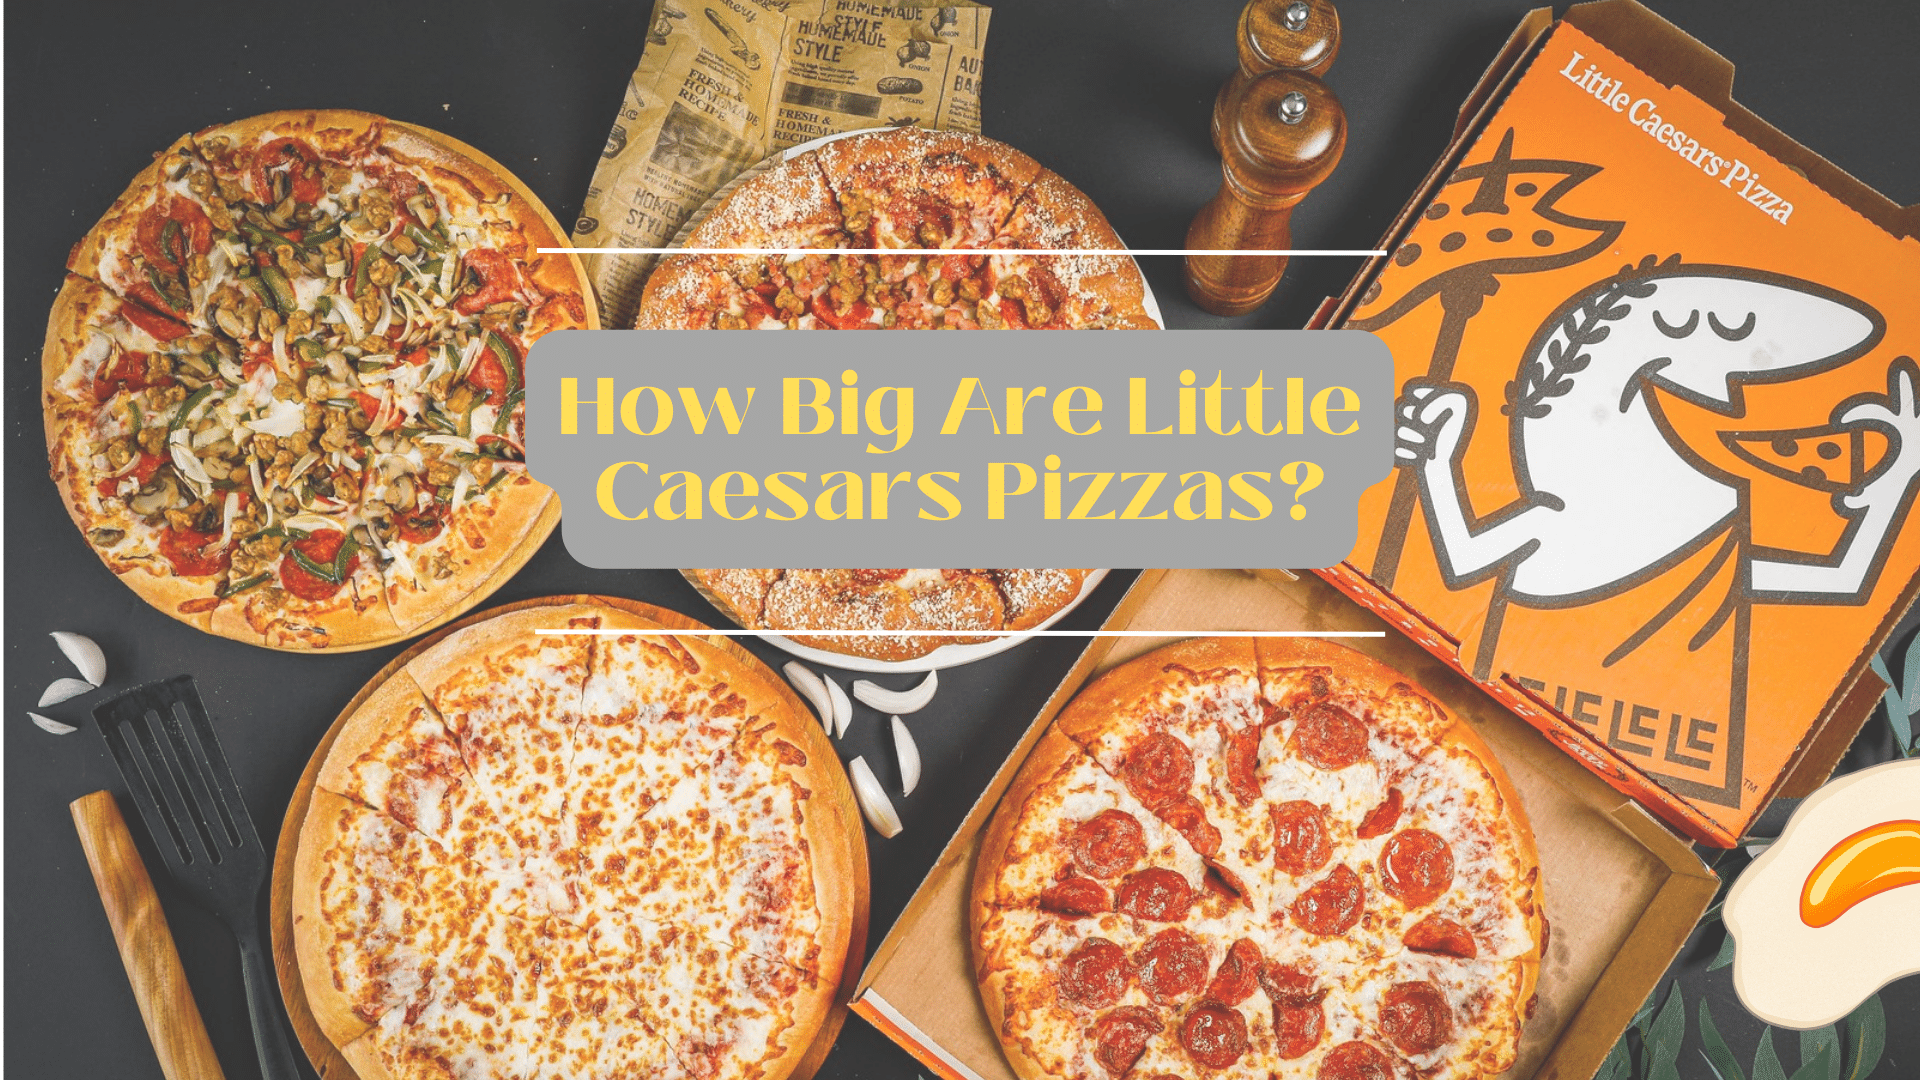 How Big Are Little Caesars Pizzas